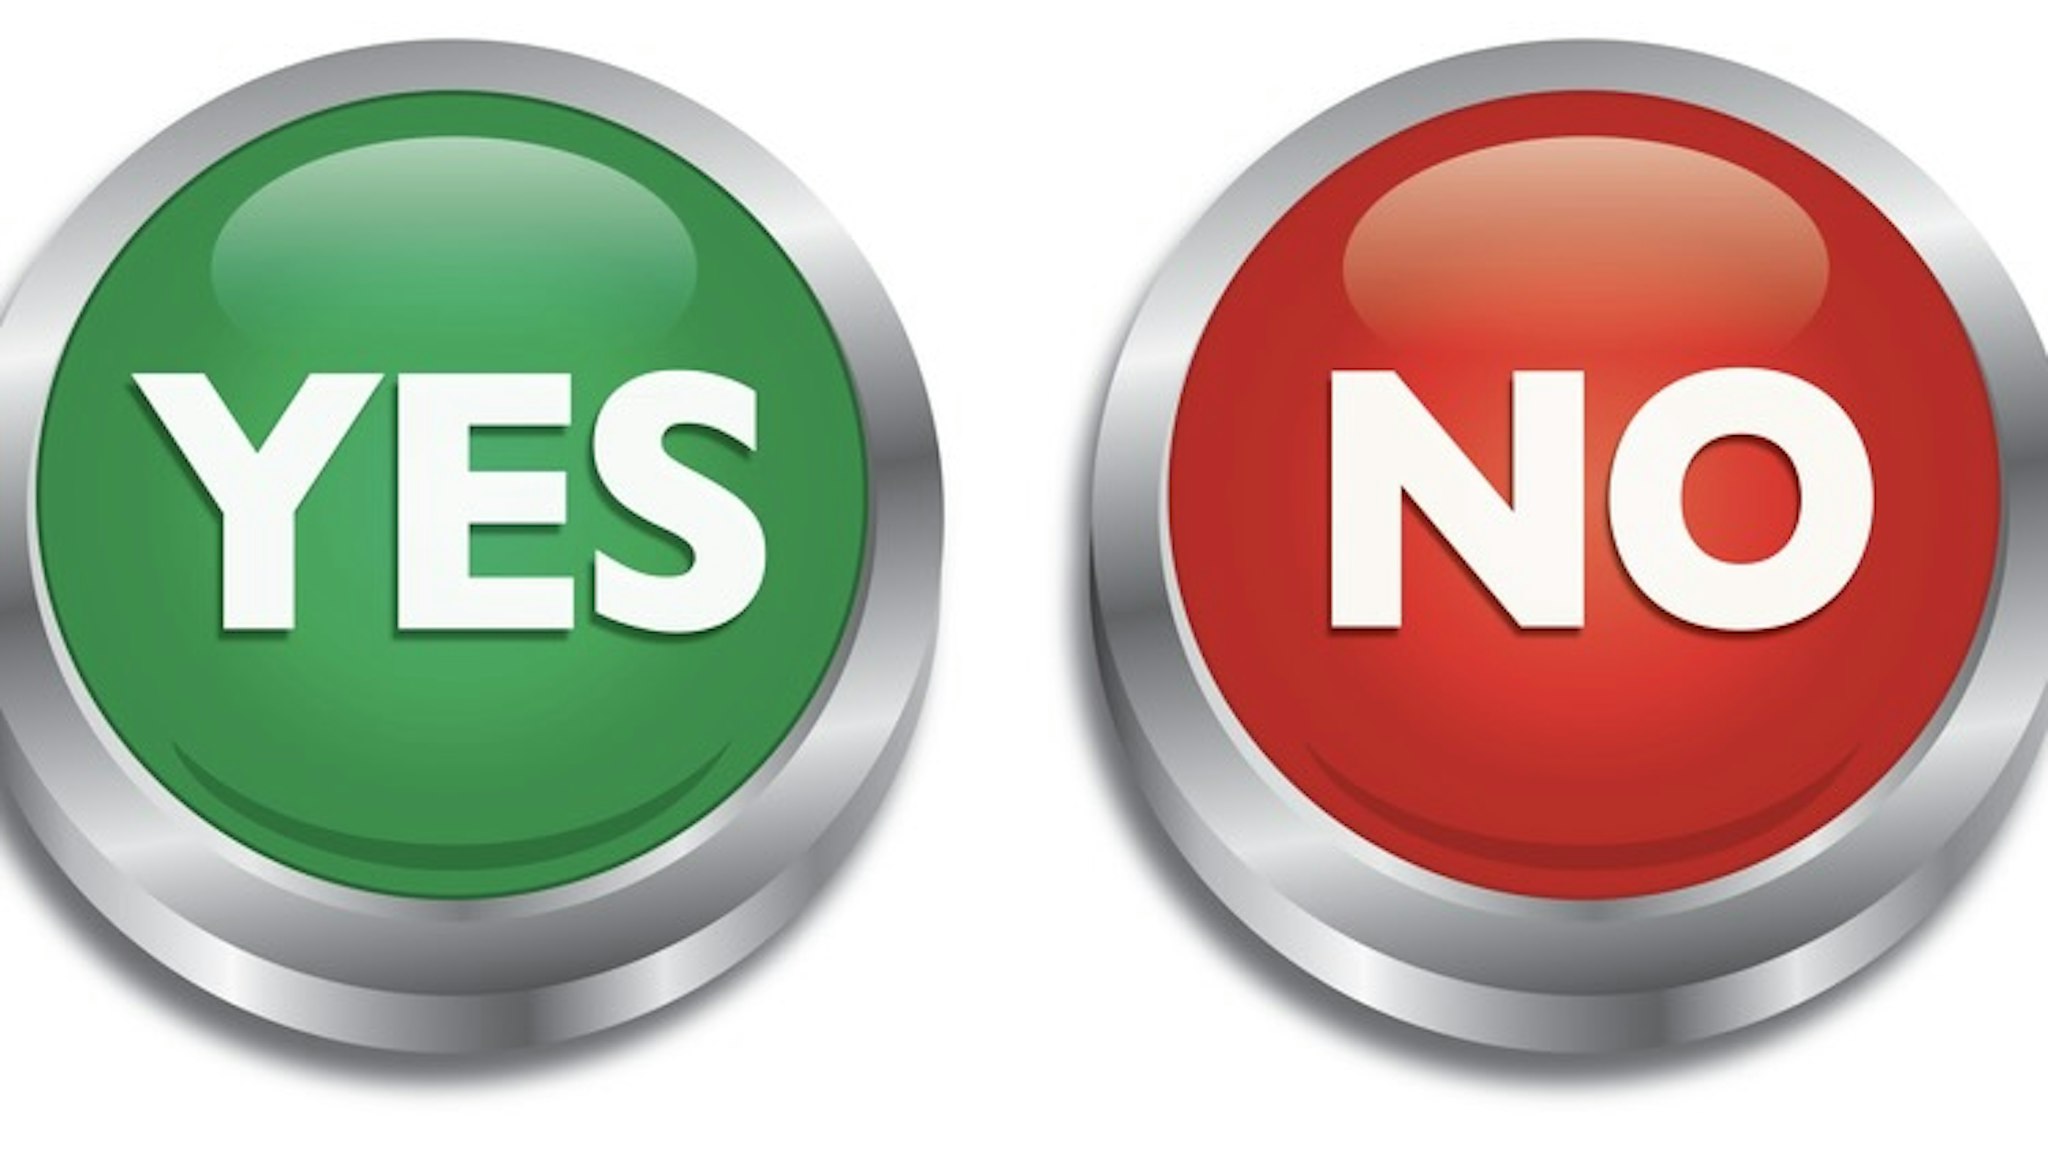 Yes No Push Buttons - stock vector Vector illustration of shiny yes and no push buttons.